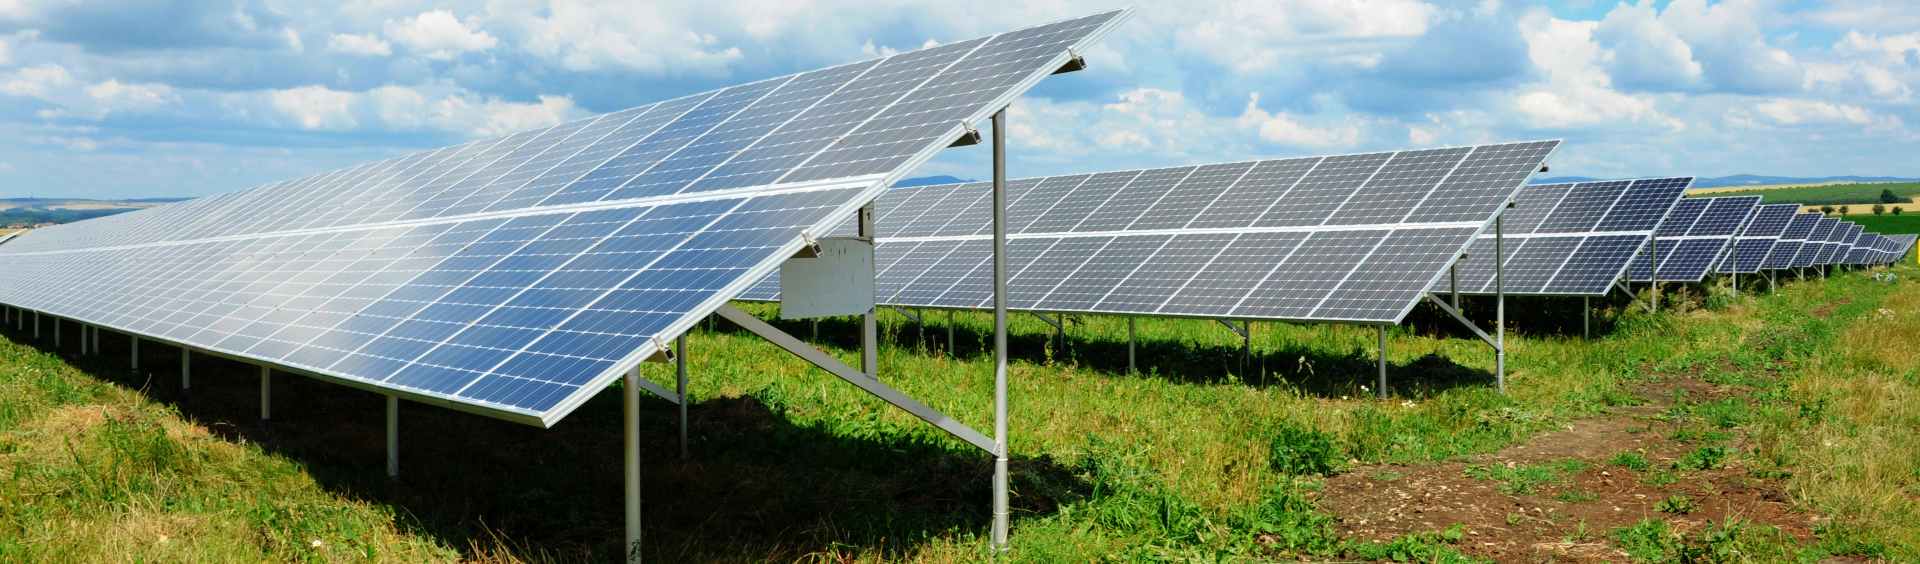 New Community Solar Project in Kankakee Open to All Qualified ComEd Customers